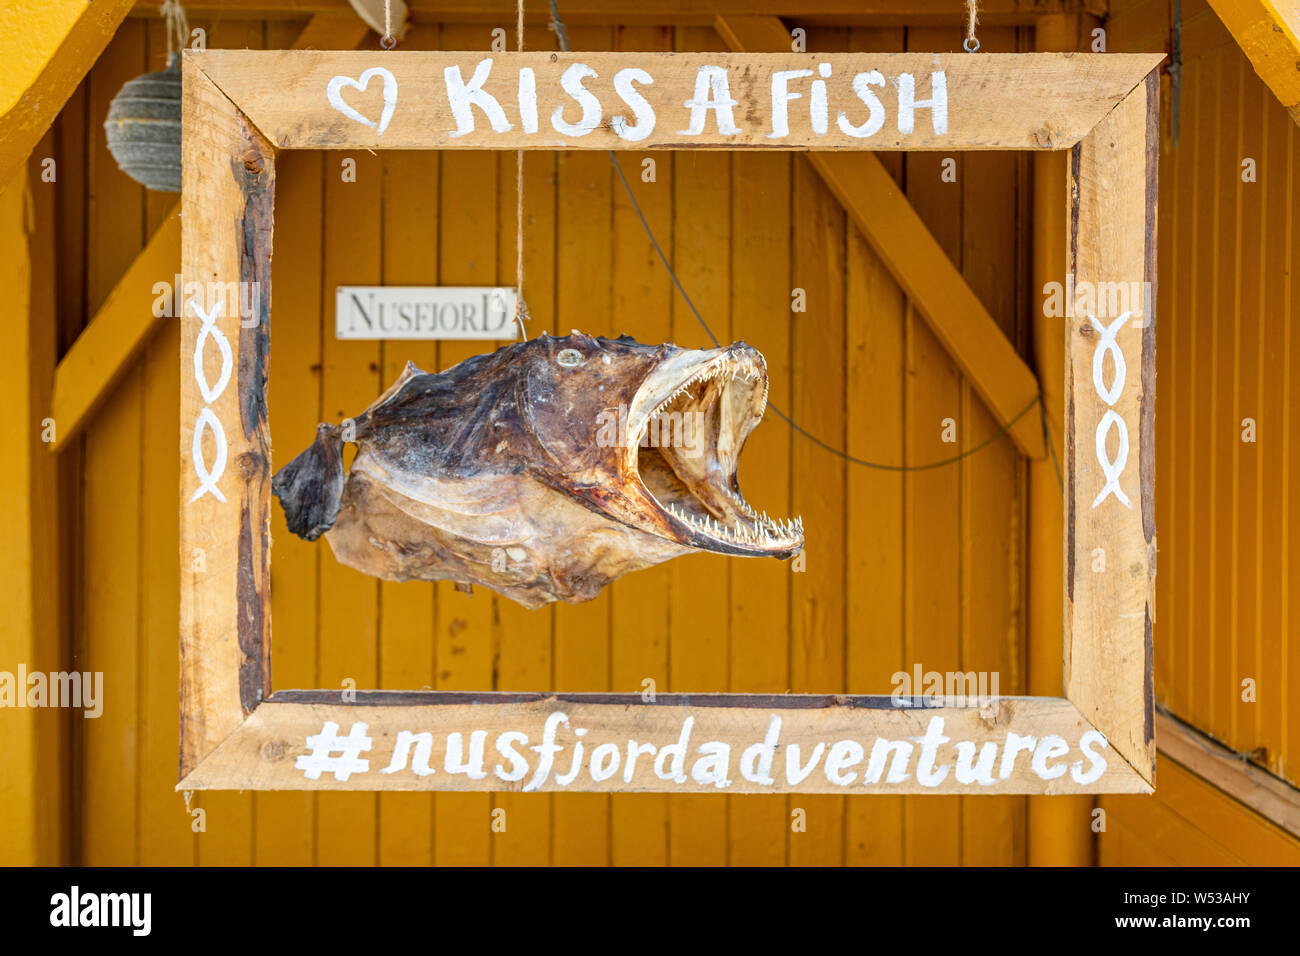 Kiss A Fish, an eye catcher sign for water sports activities in Nusfjord, on Flakstadøya Island, in the Lofoten Archipelago, Norway. Stock Photo